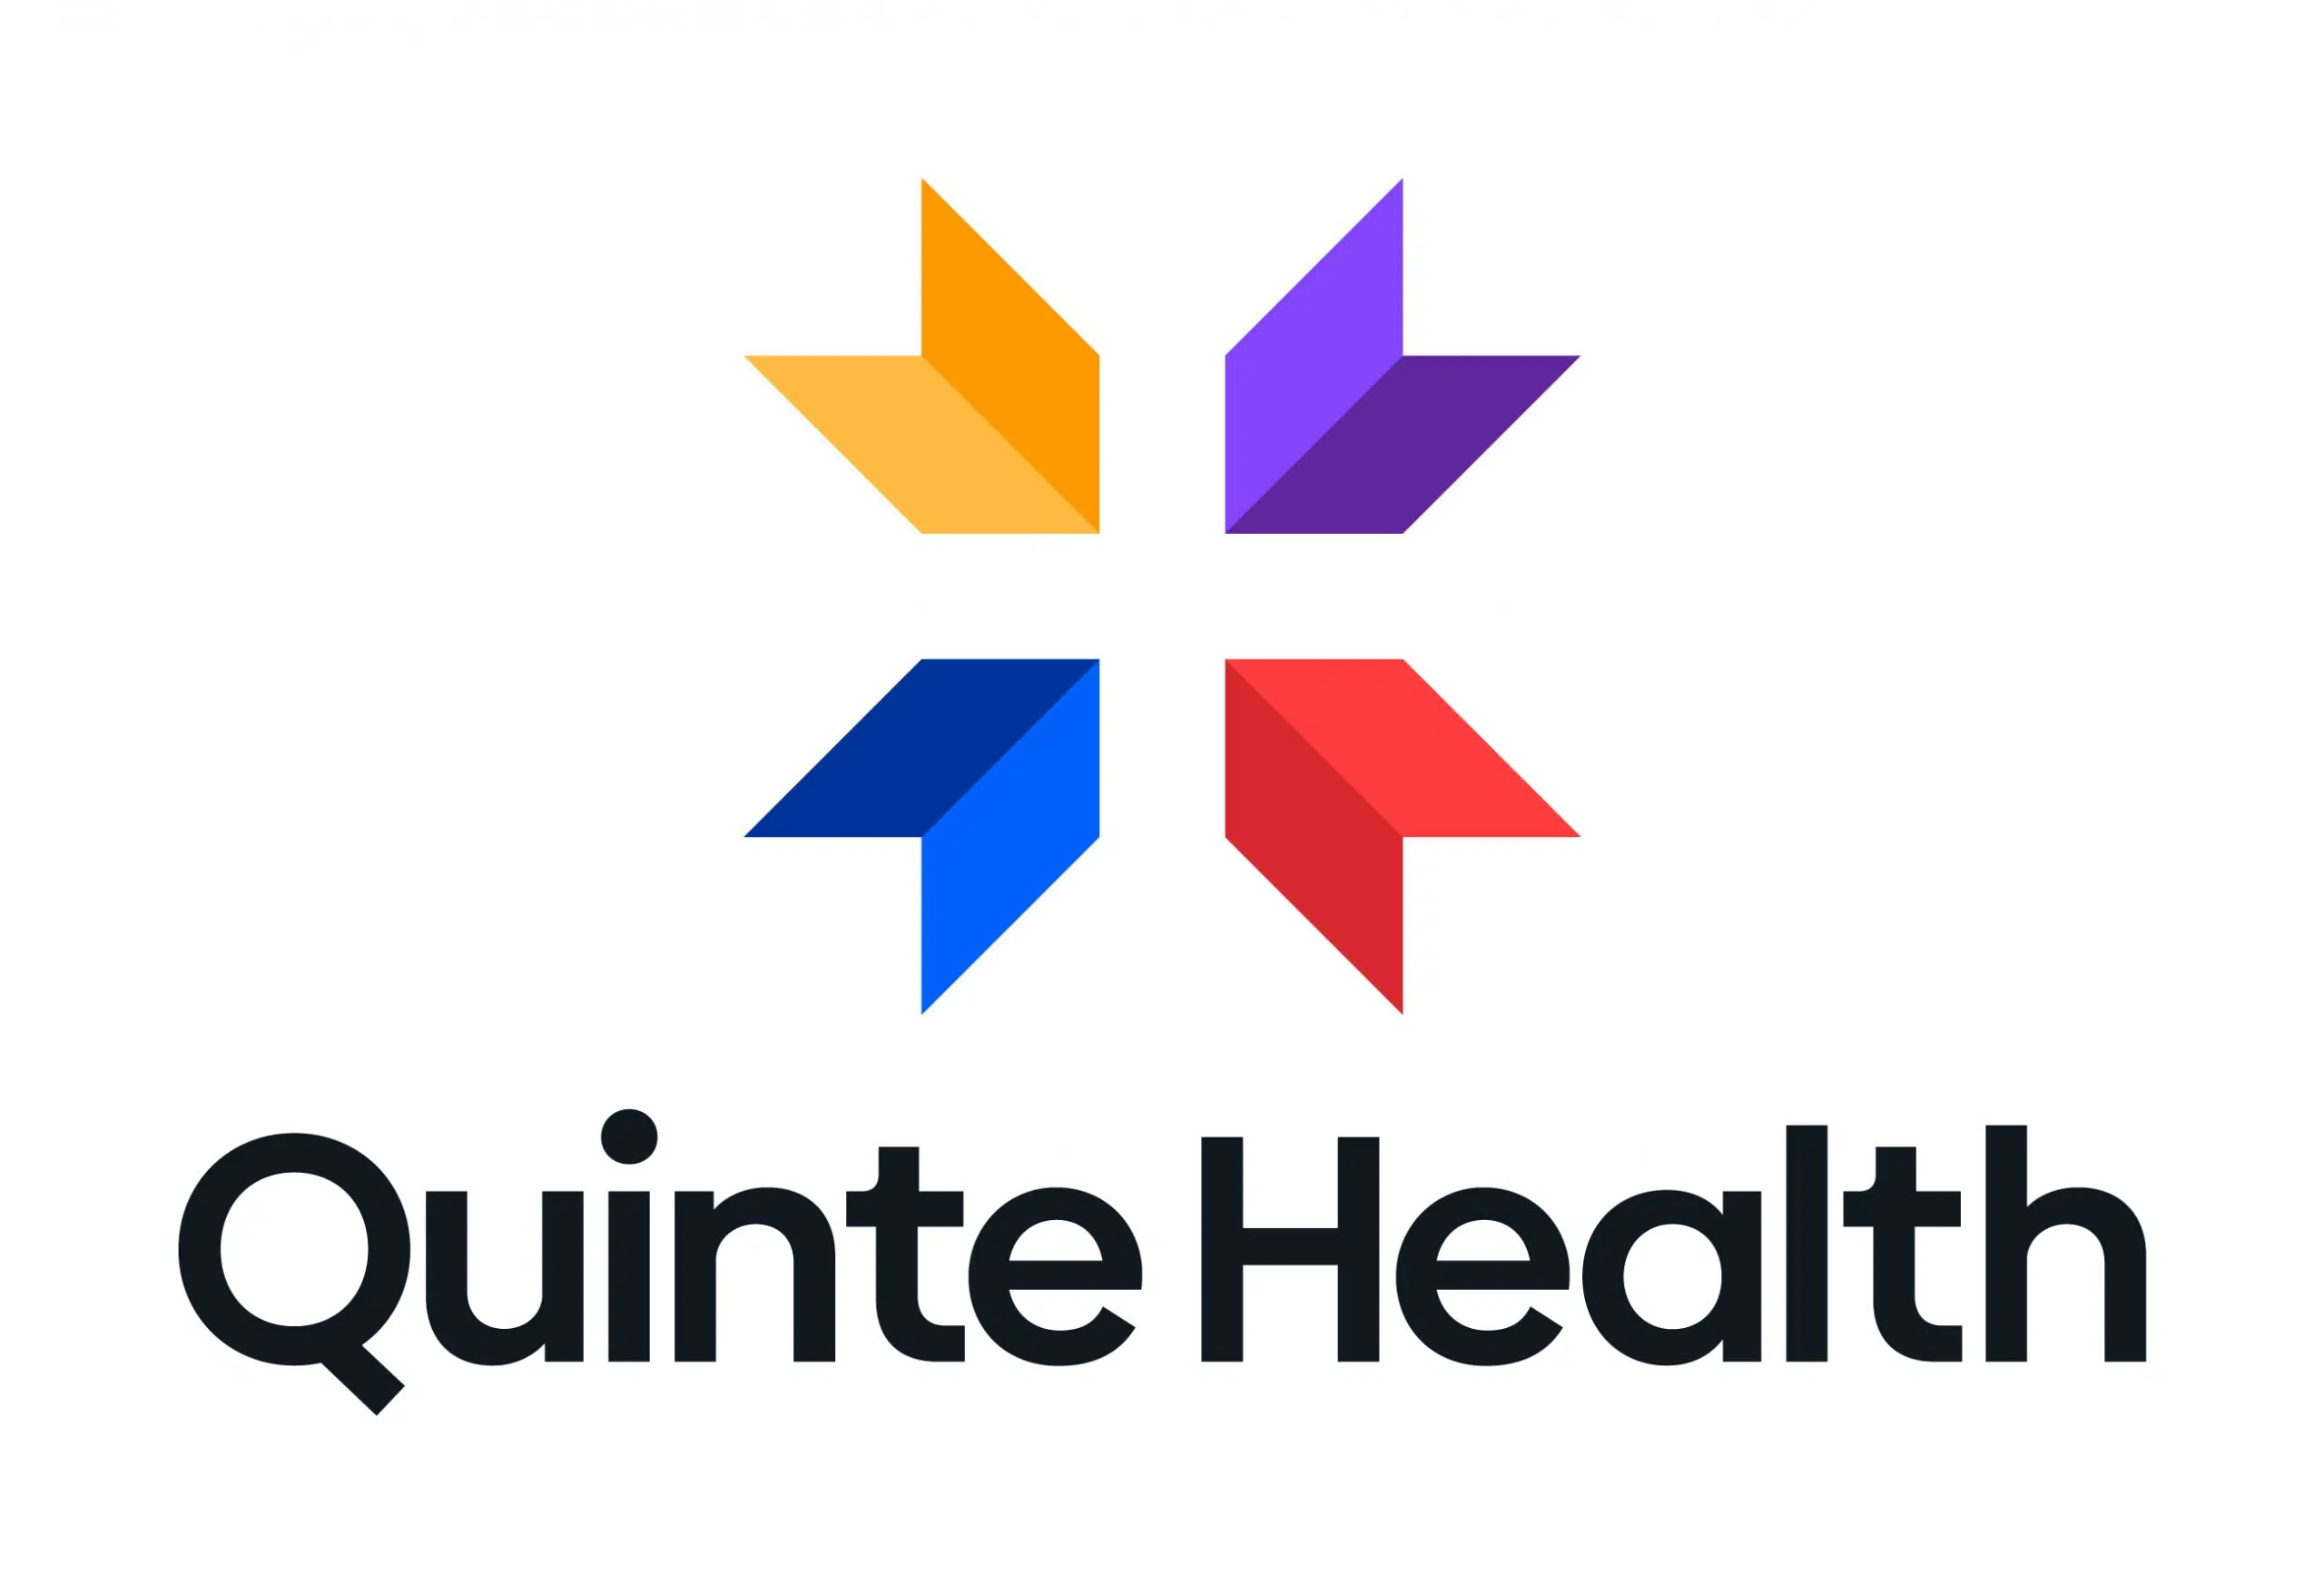 "Historic" level of service demand highlights Quinte Health's CEO report